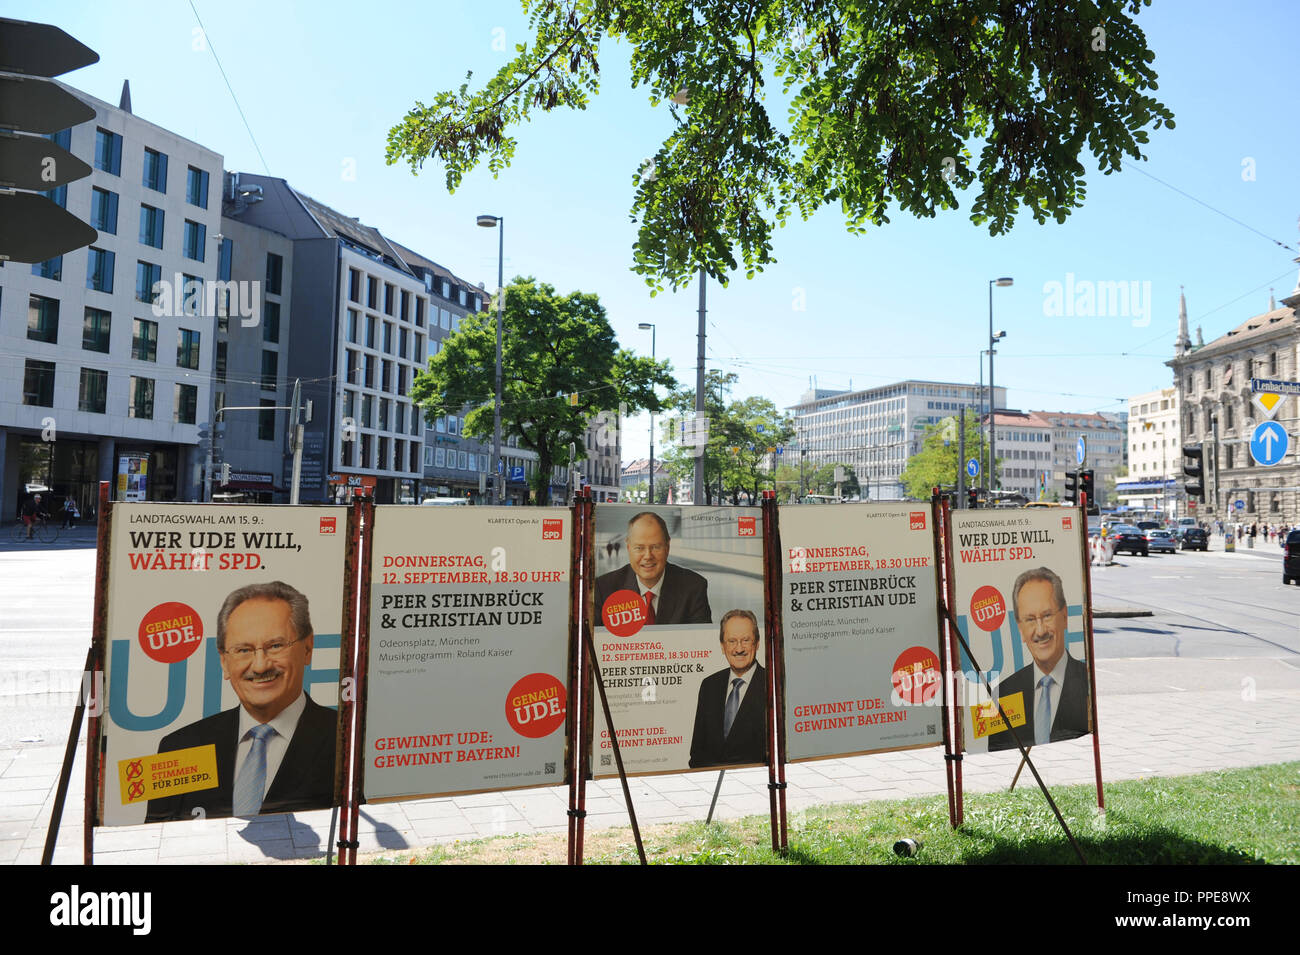 State election campaign 2013: Election posters of Christian Ude, SPD candidate for the office of Minister-President, in the city center of Munich, promoting a double rally with SPD chancellor candidate Peer Steinbrueck. Stock Photo